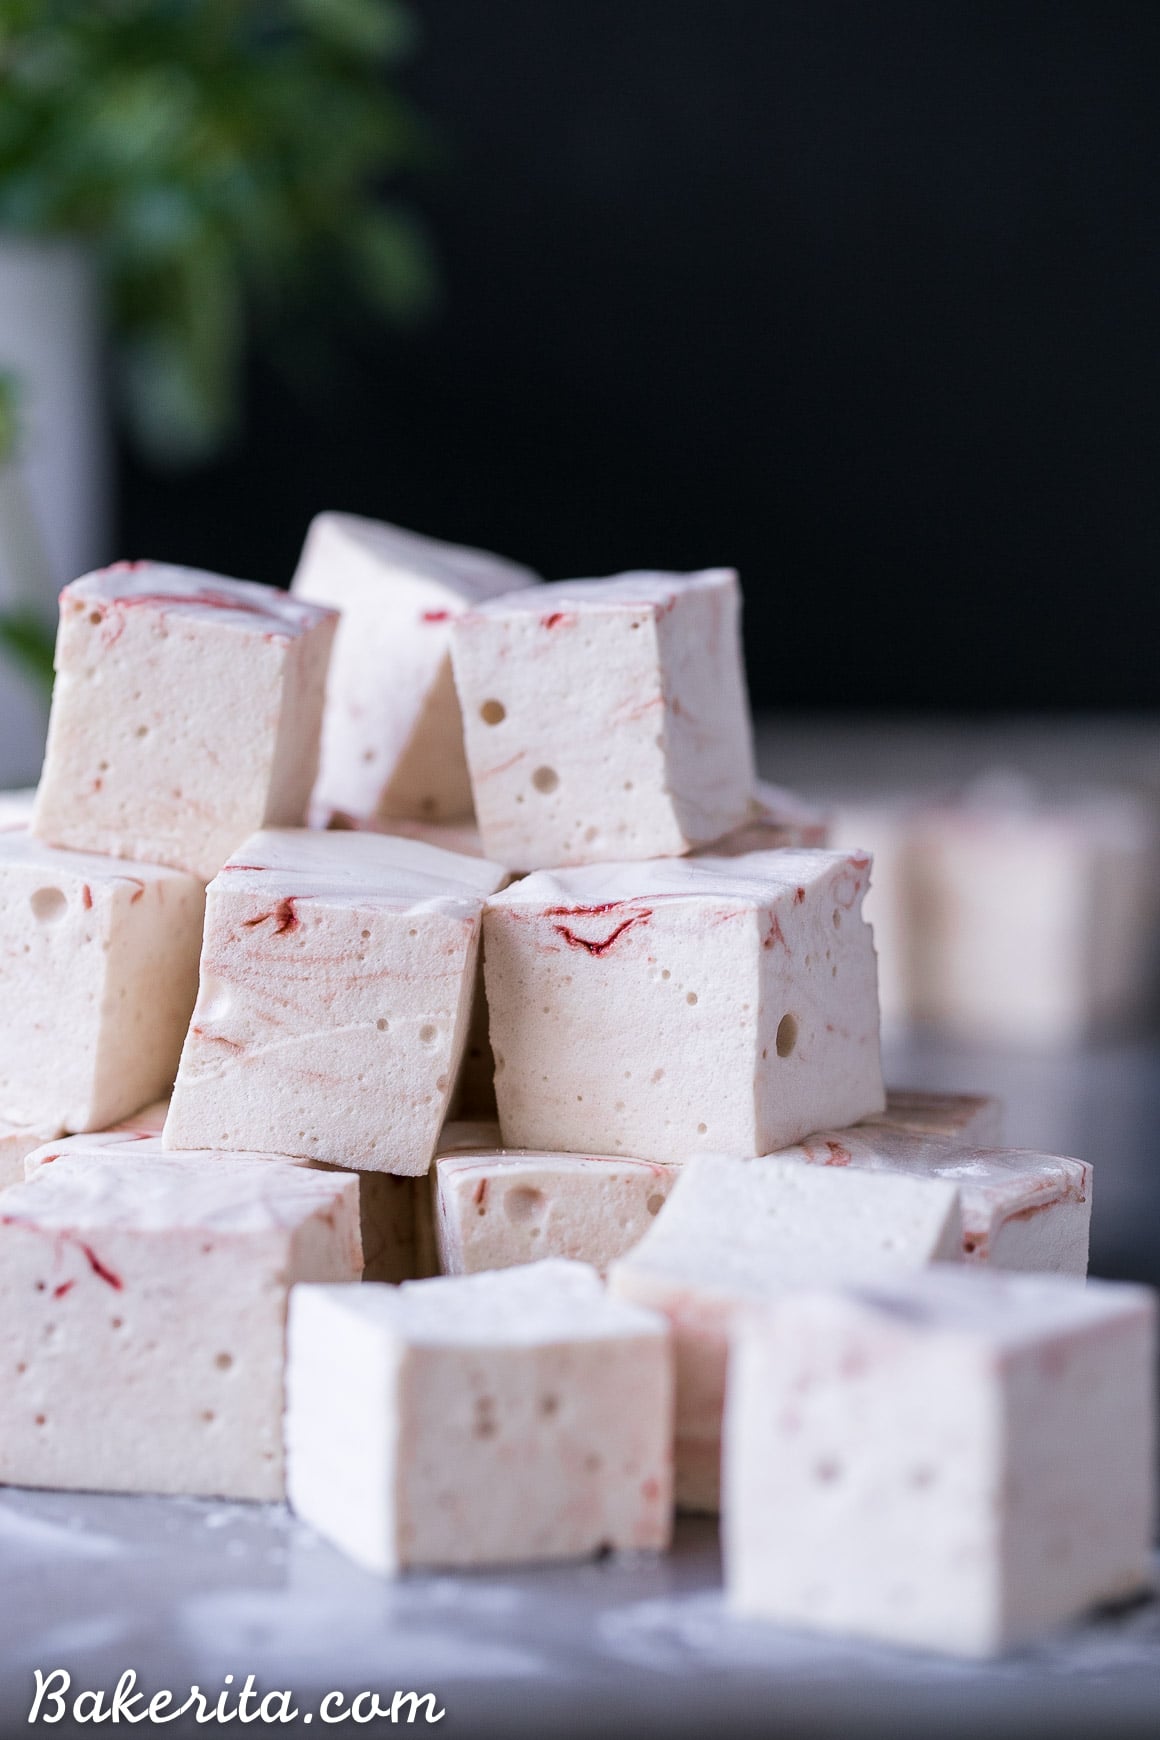 These Paleo Peppermint Marshmallows are exactly what your hot chocolate needs! They're light, fluffy, and easier to make than you'd think. This recipe is Paleo + refined sugar free, with a beautiful swirl of homemade red food coloring!